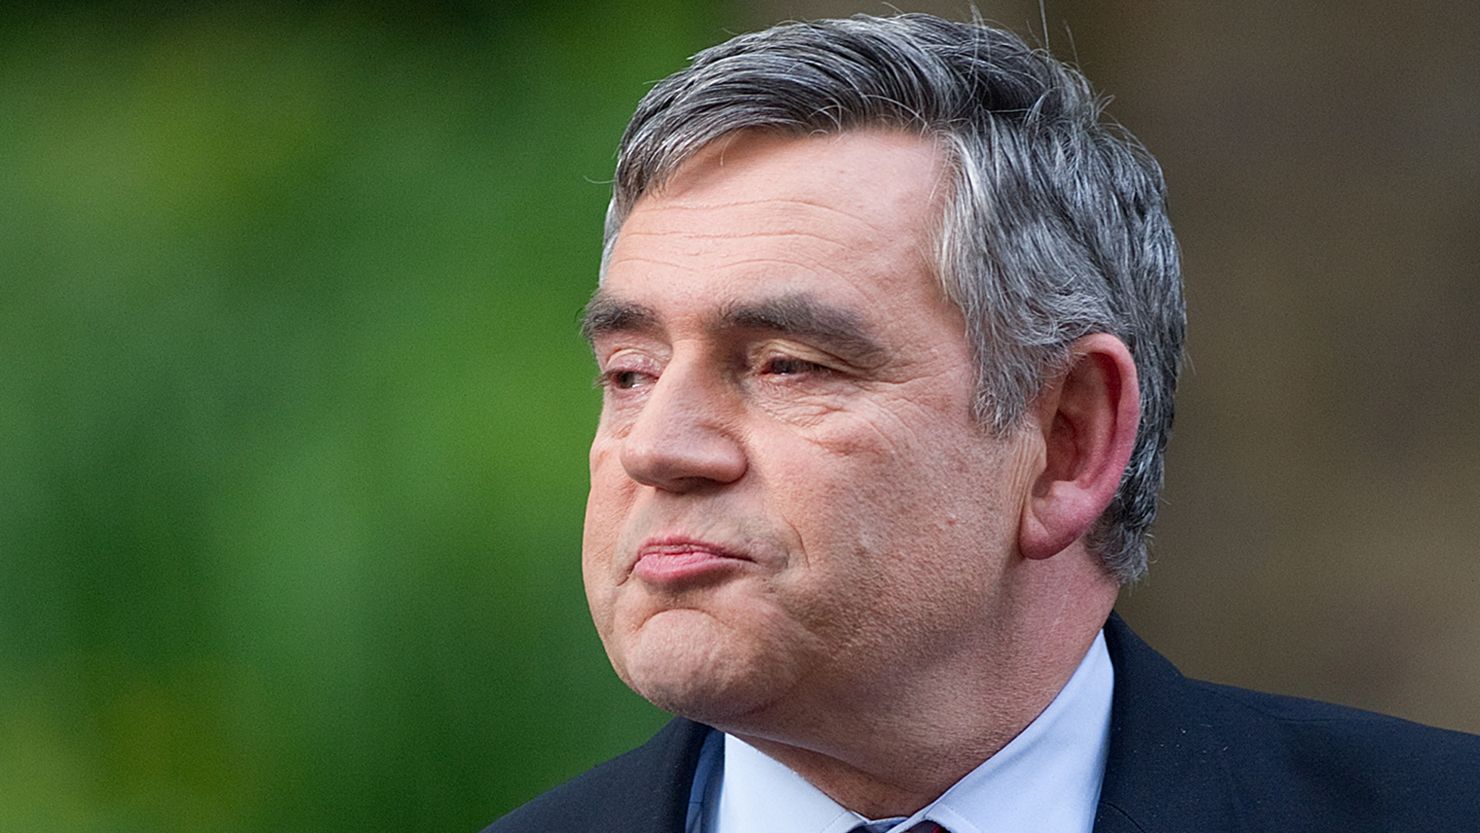 Former Labour Party leader Gordon Brown's e-mail may have been hacked by investigators working for British newspapers